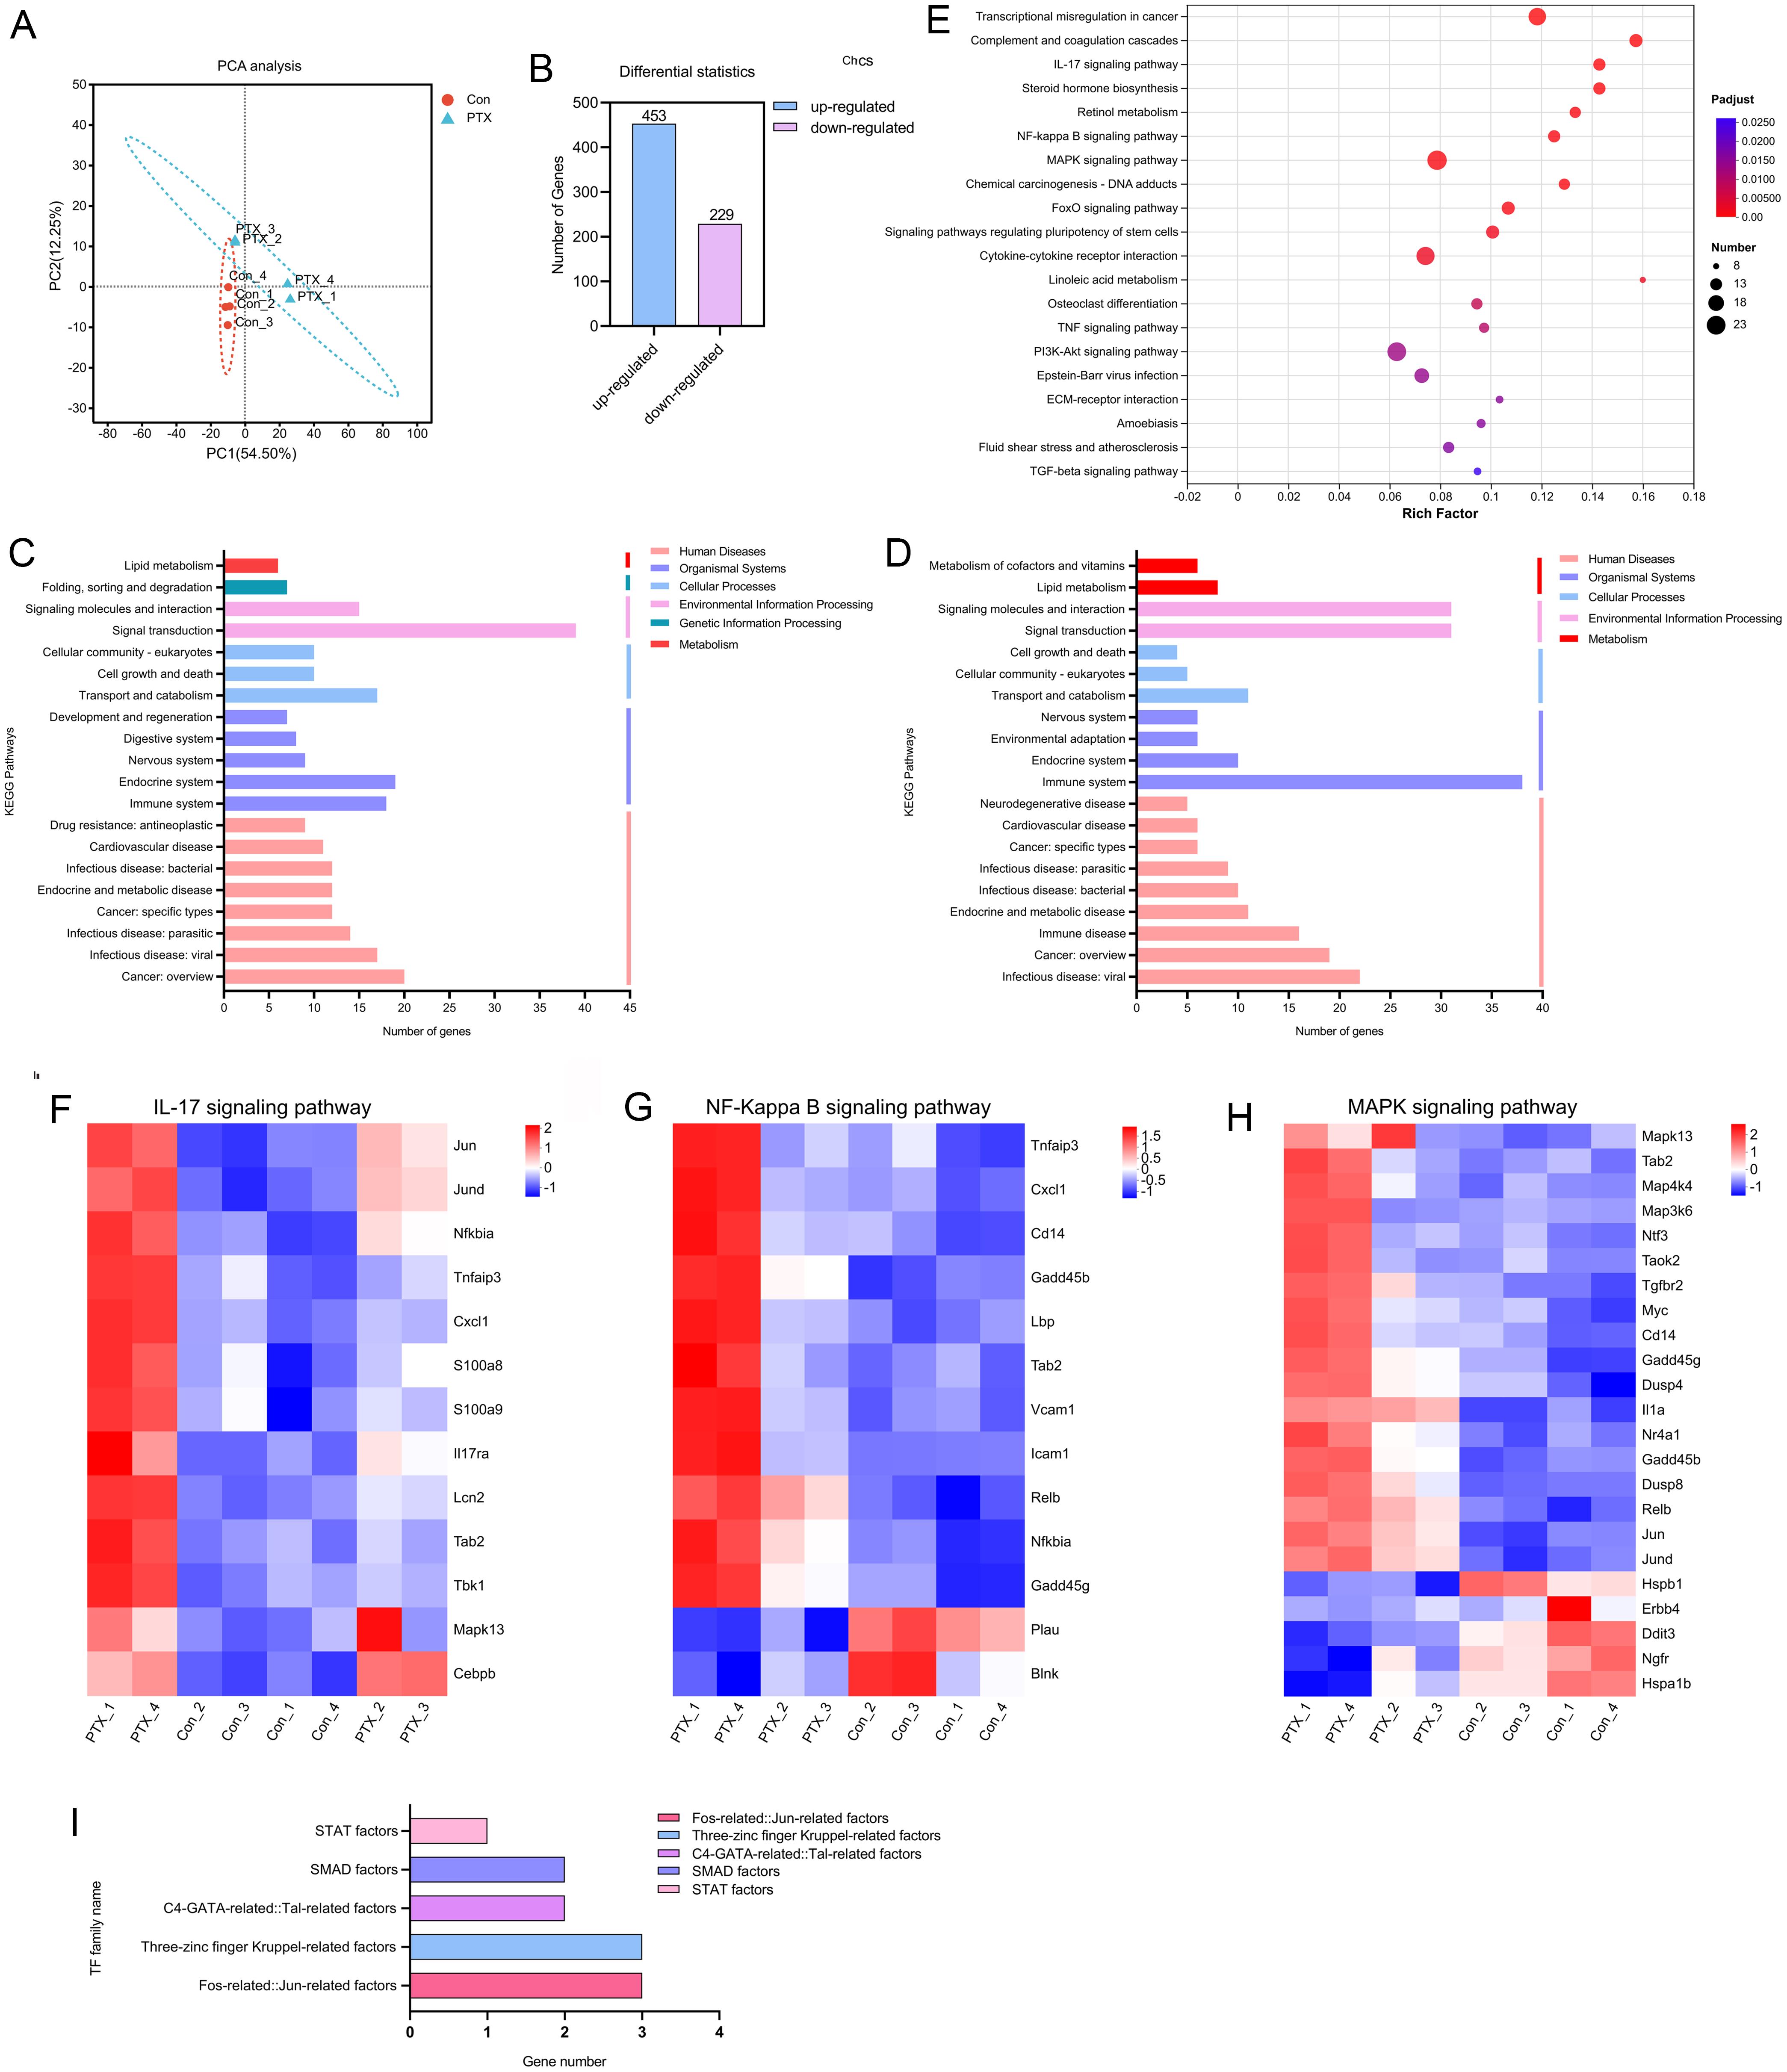 Differentially expressed genes (DEGs) in the liver tissues of PTX-treated (PTX) mice and control (Con) mice.